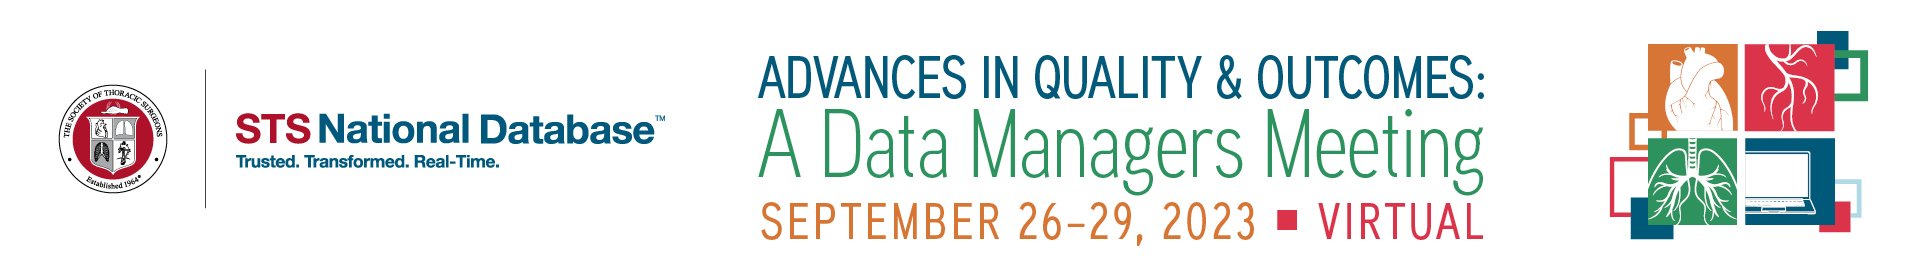 2023 Advances in Quality & Outcomes: A Data Managers Meeting  Event Banner